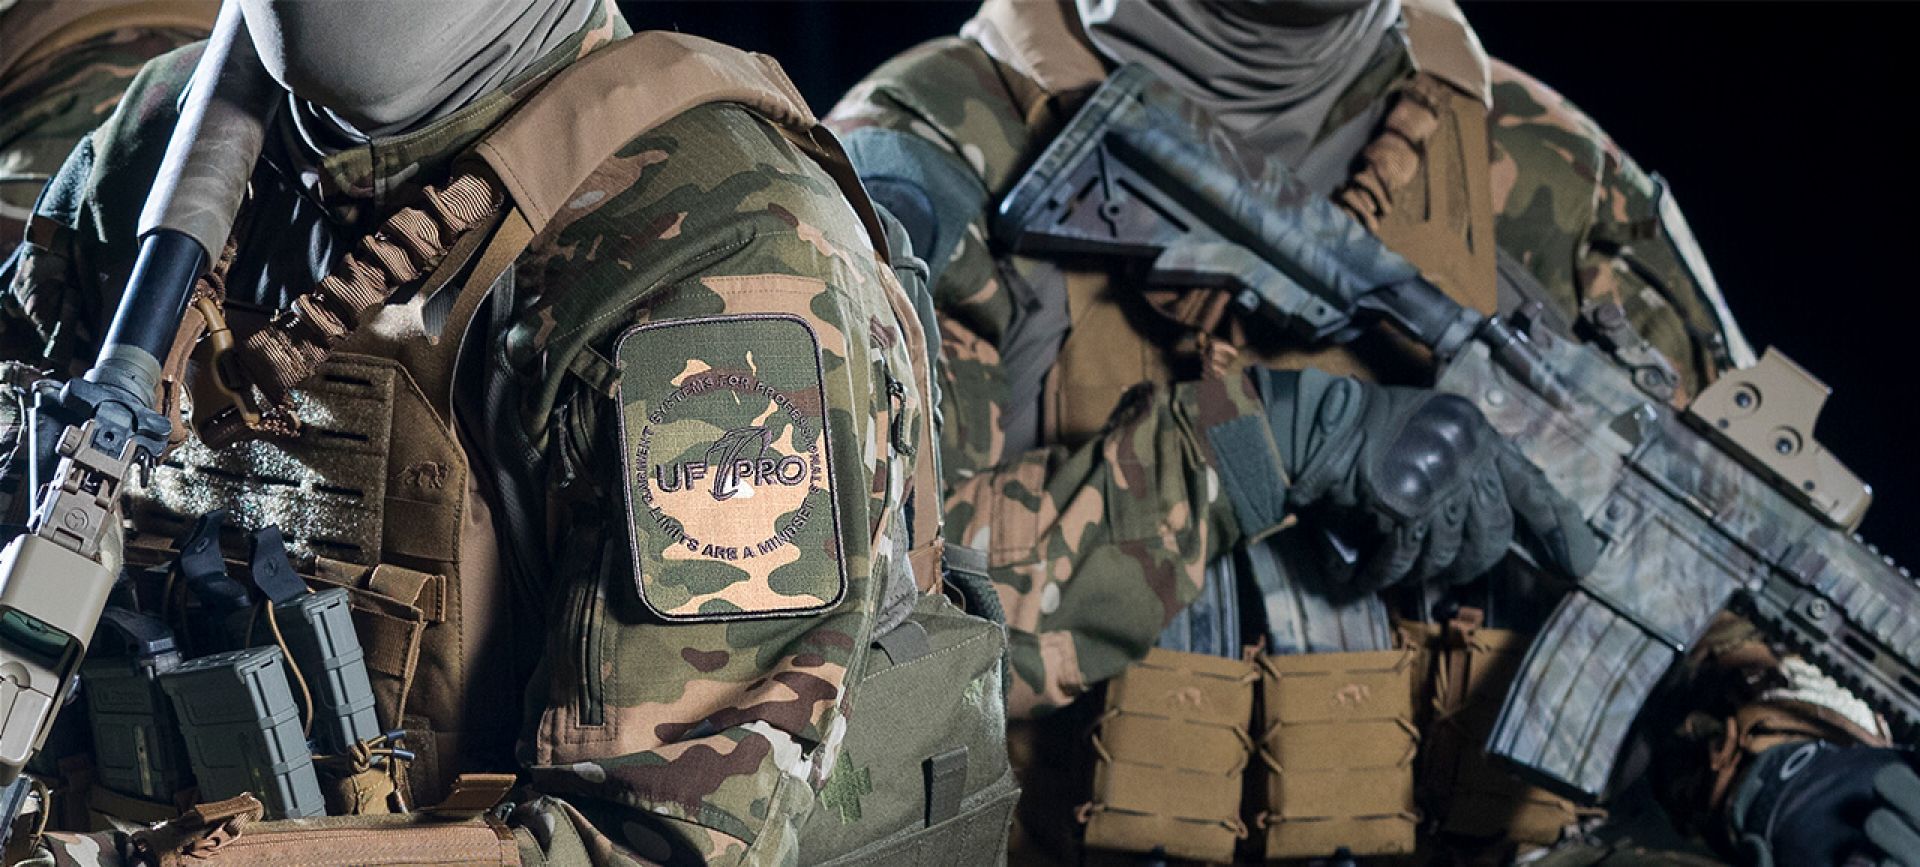 Get to know the history & types of tactical patches